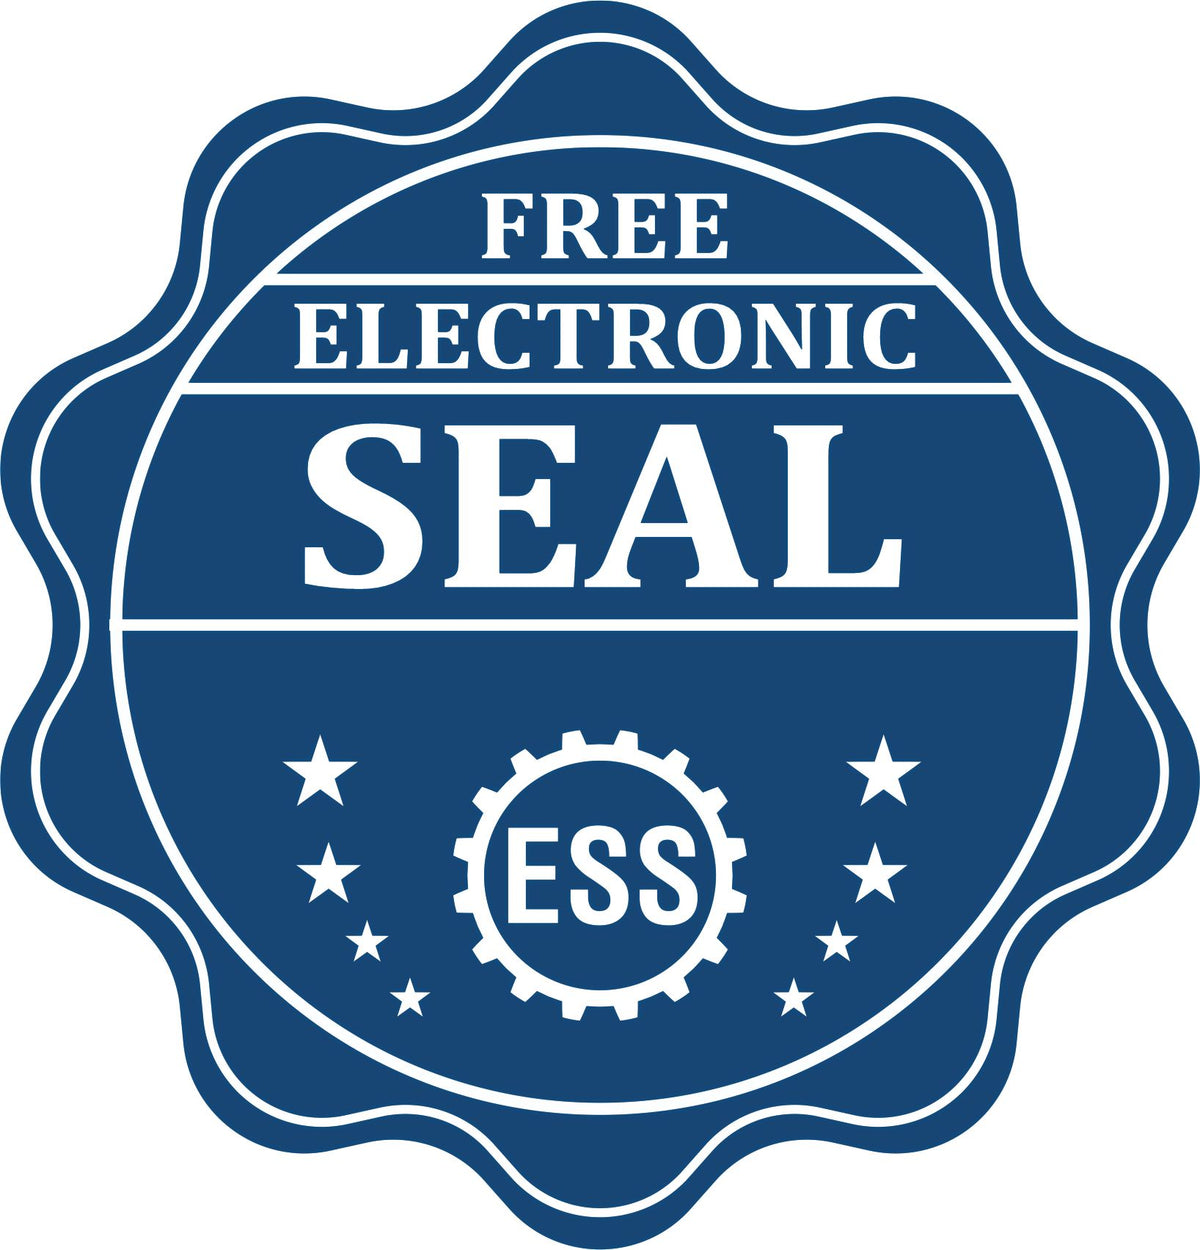 A badge showing a free electronic seal for the Heavy Duty Cast Iron Colorado Land Surveyor Seal Embosser with stars and the ESS gear on the emblem.